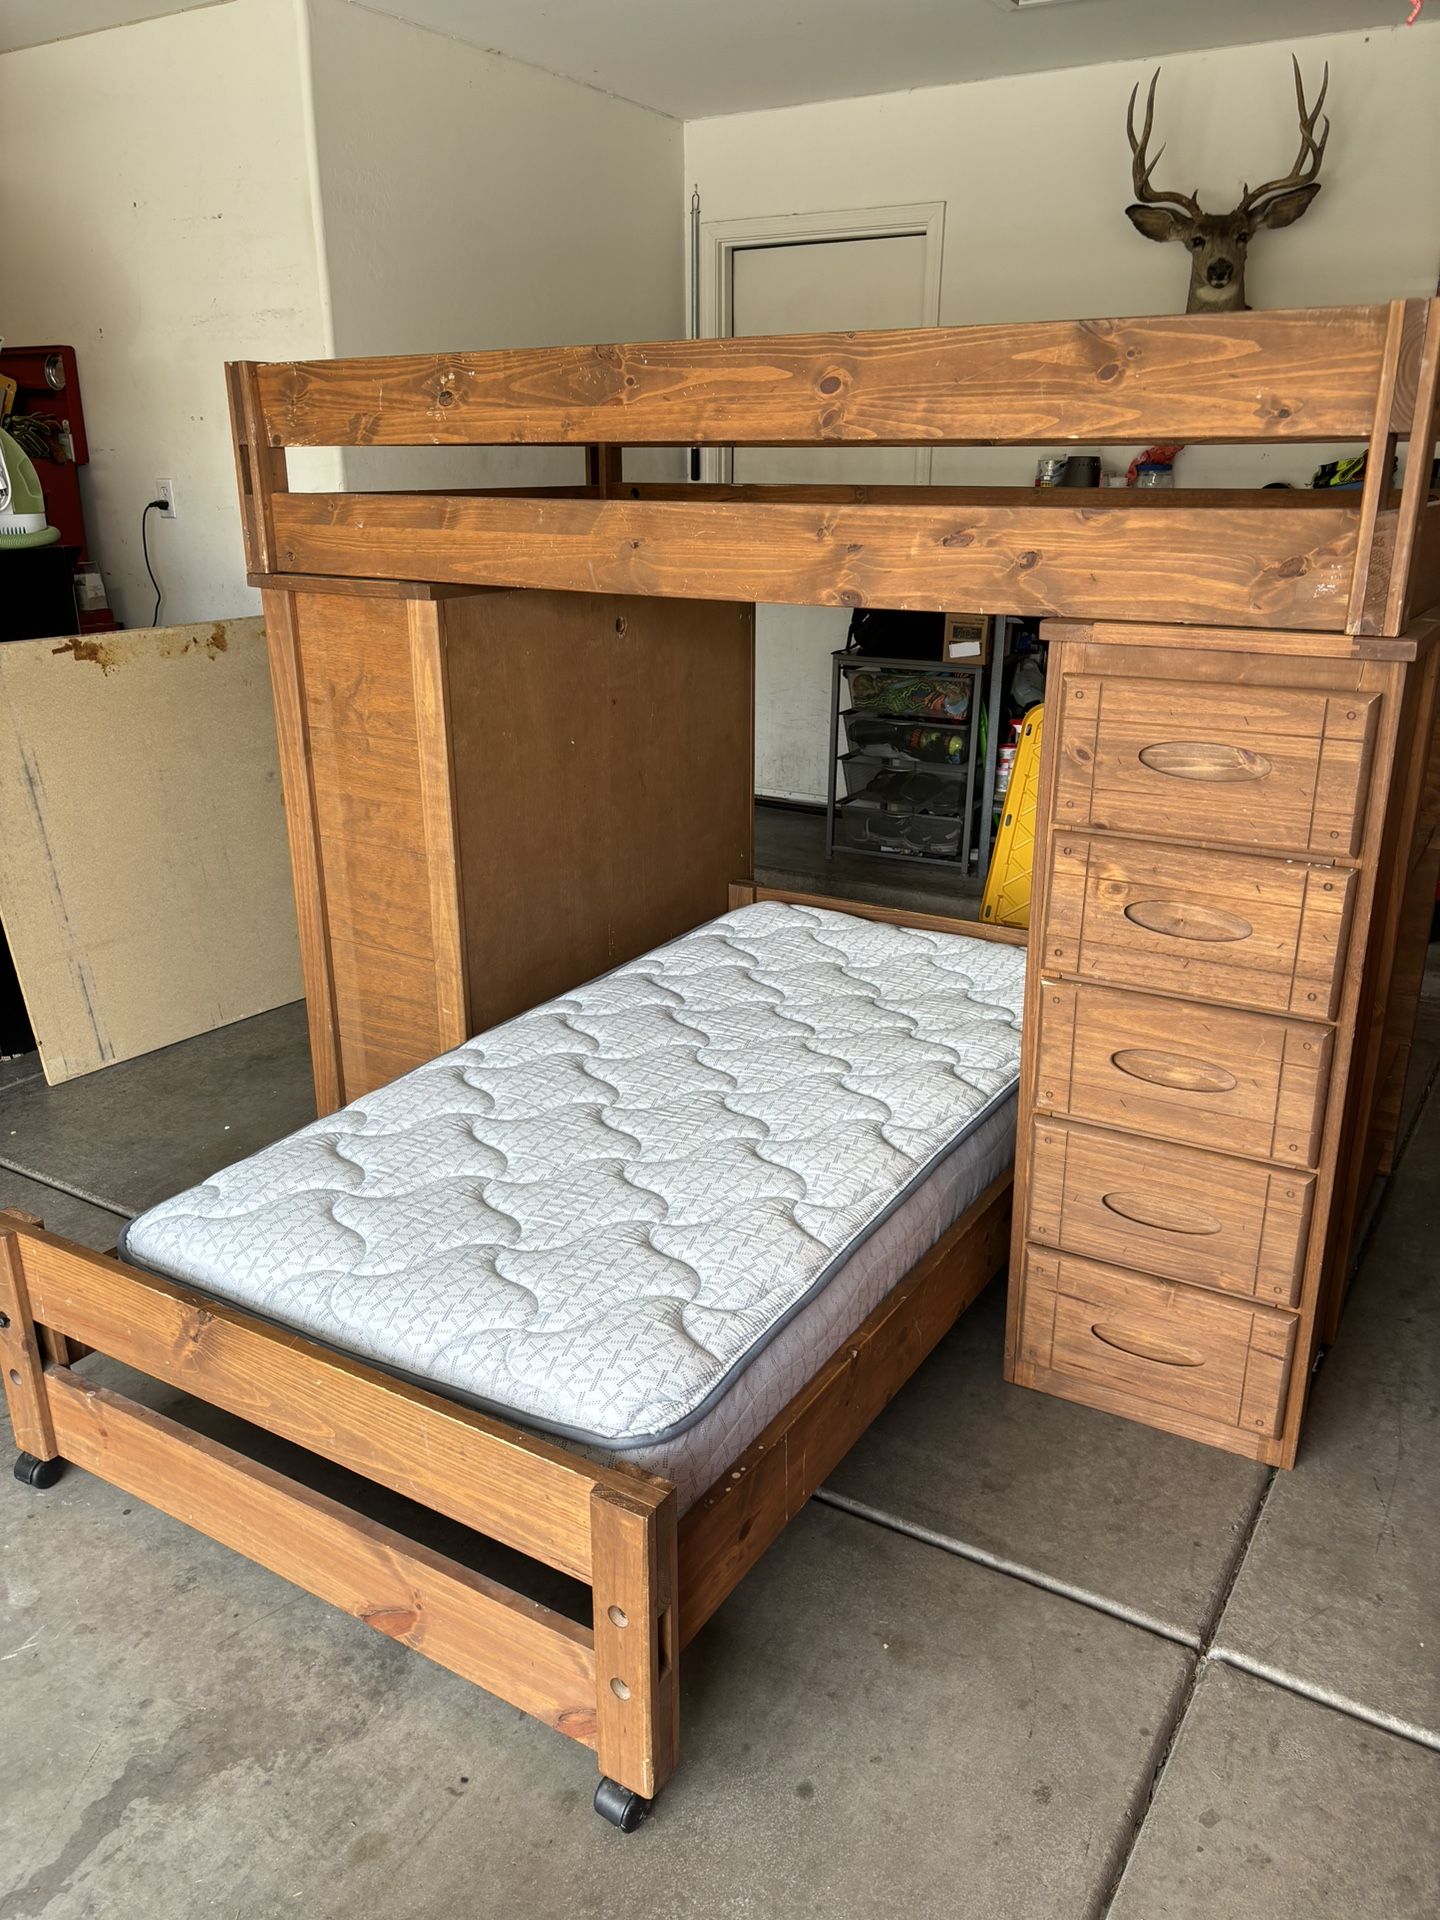 Bunk Bed Solid Wood with Desk And Dresser